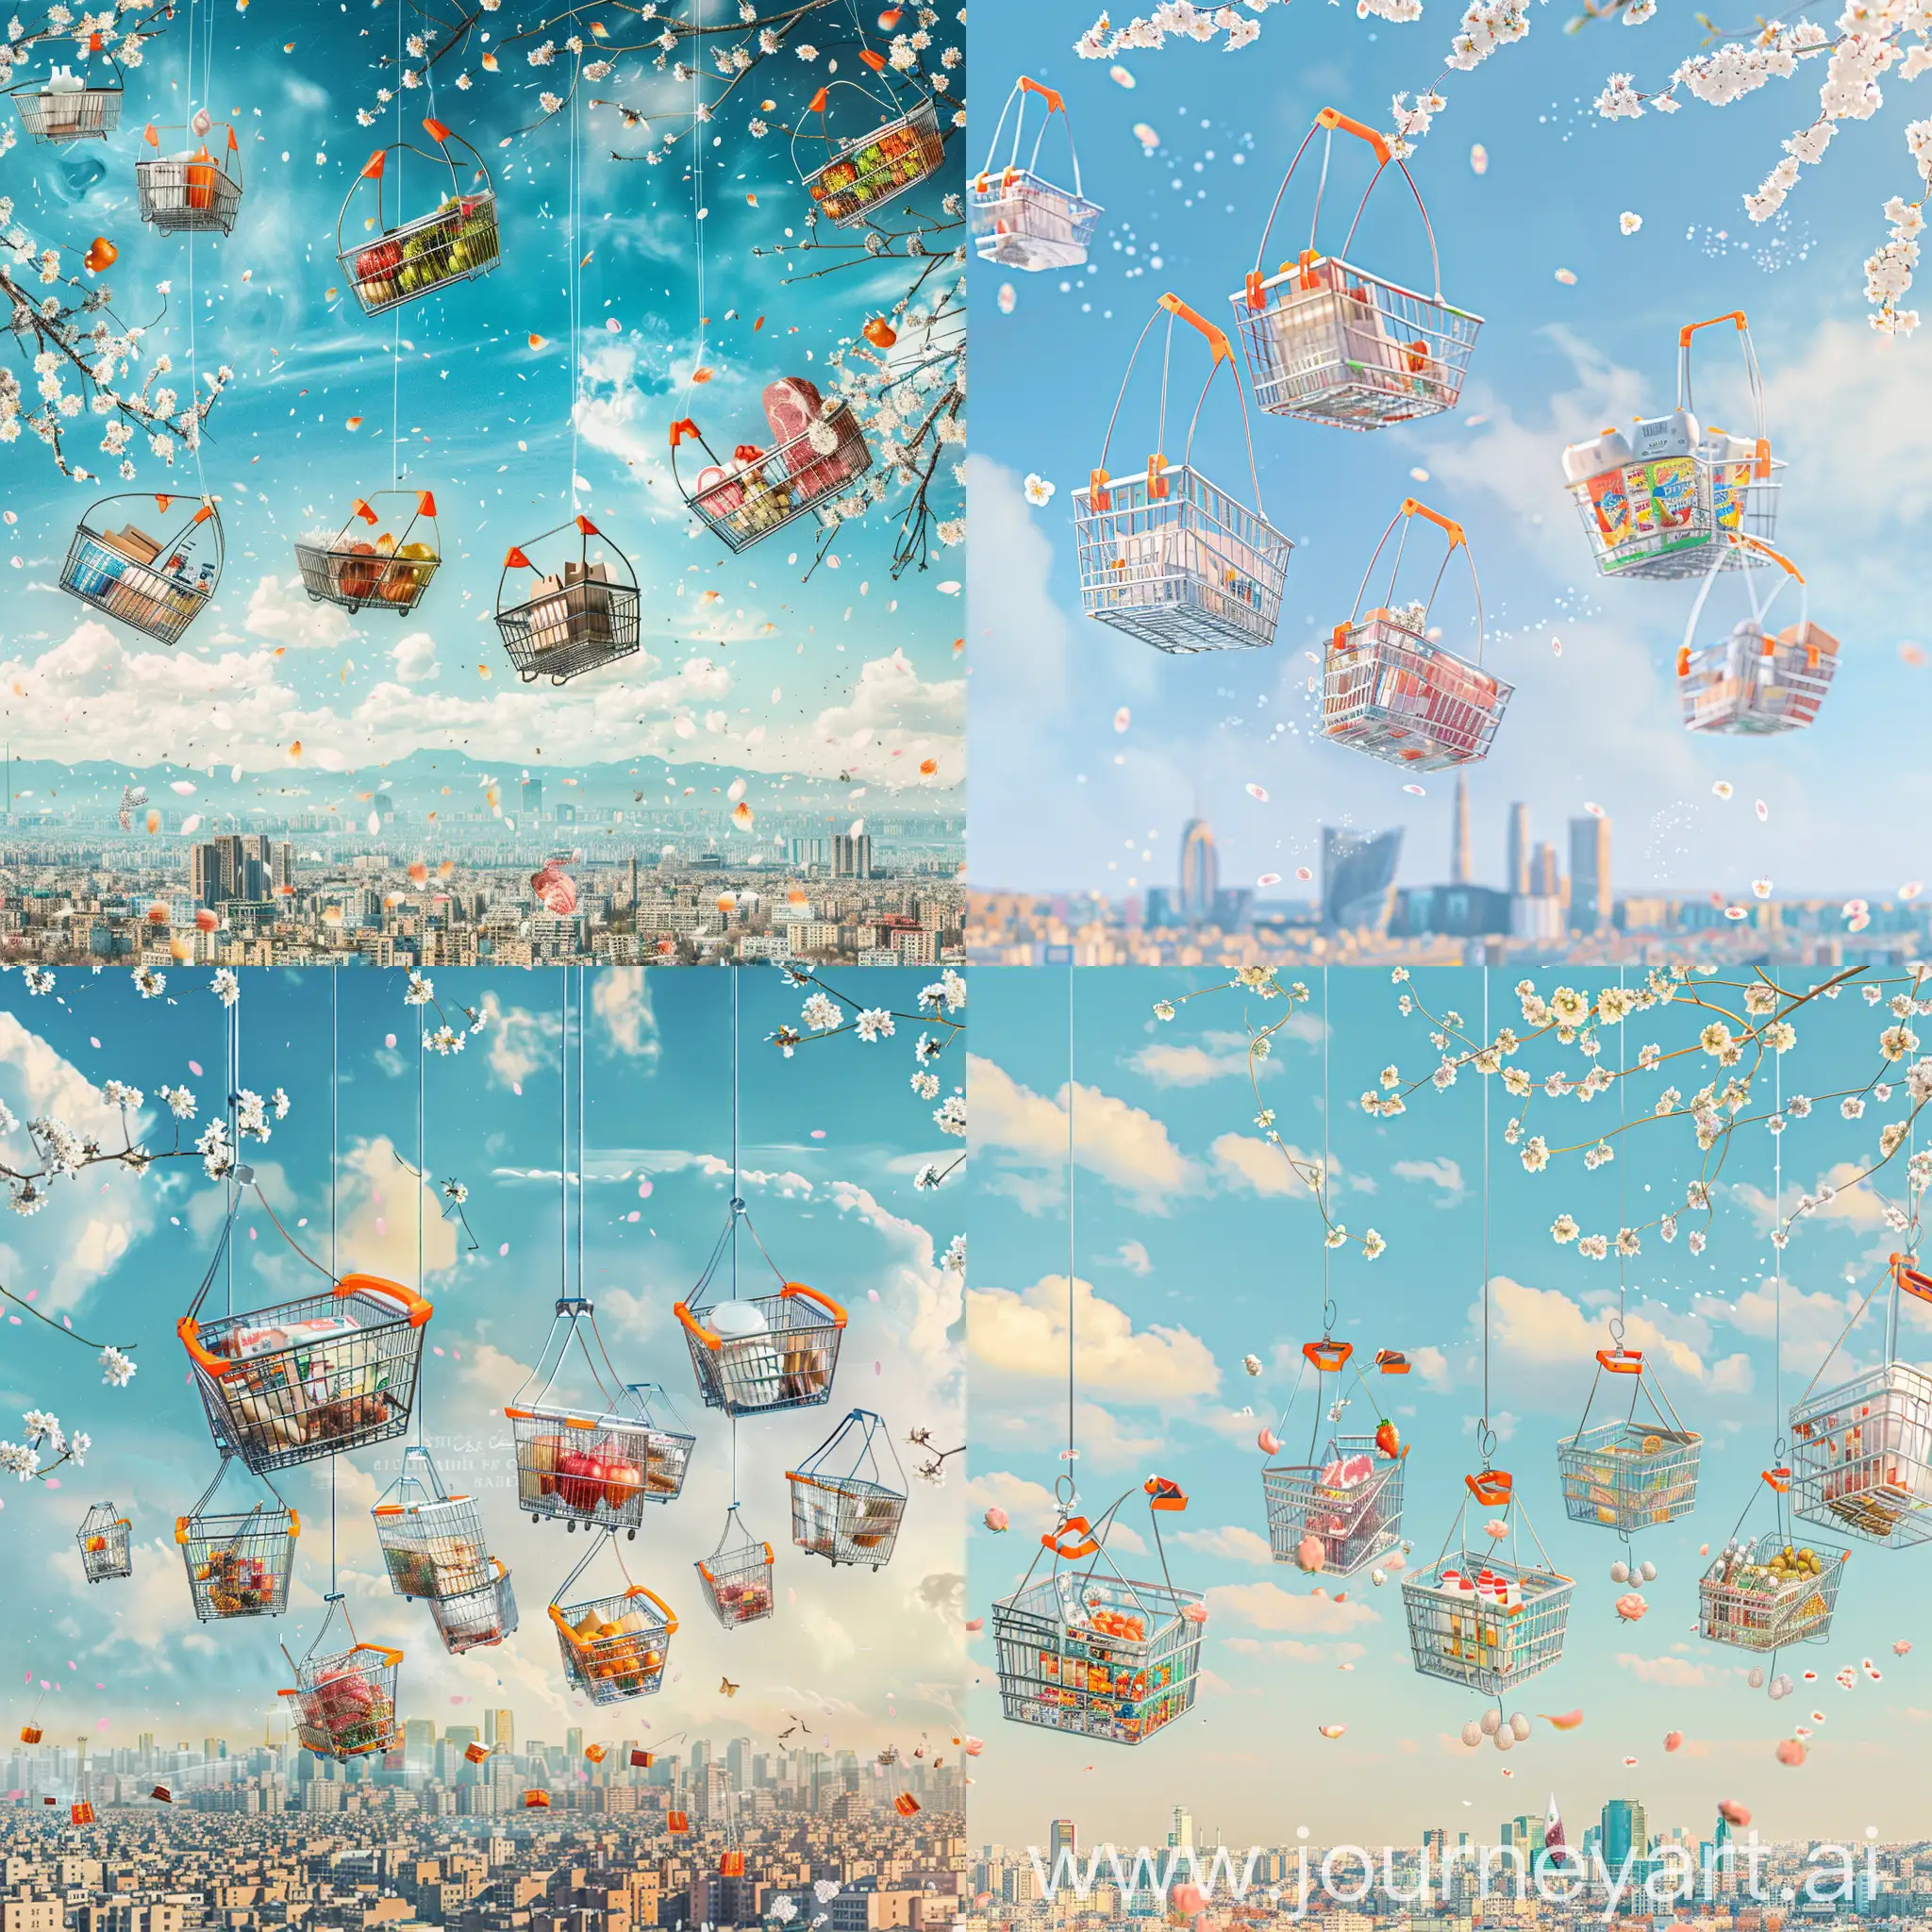 Spring-Sky-Banner-Tehran-Cityscape-with-Flying-Shopping-Baskets-and-Fresh-Produce